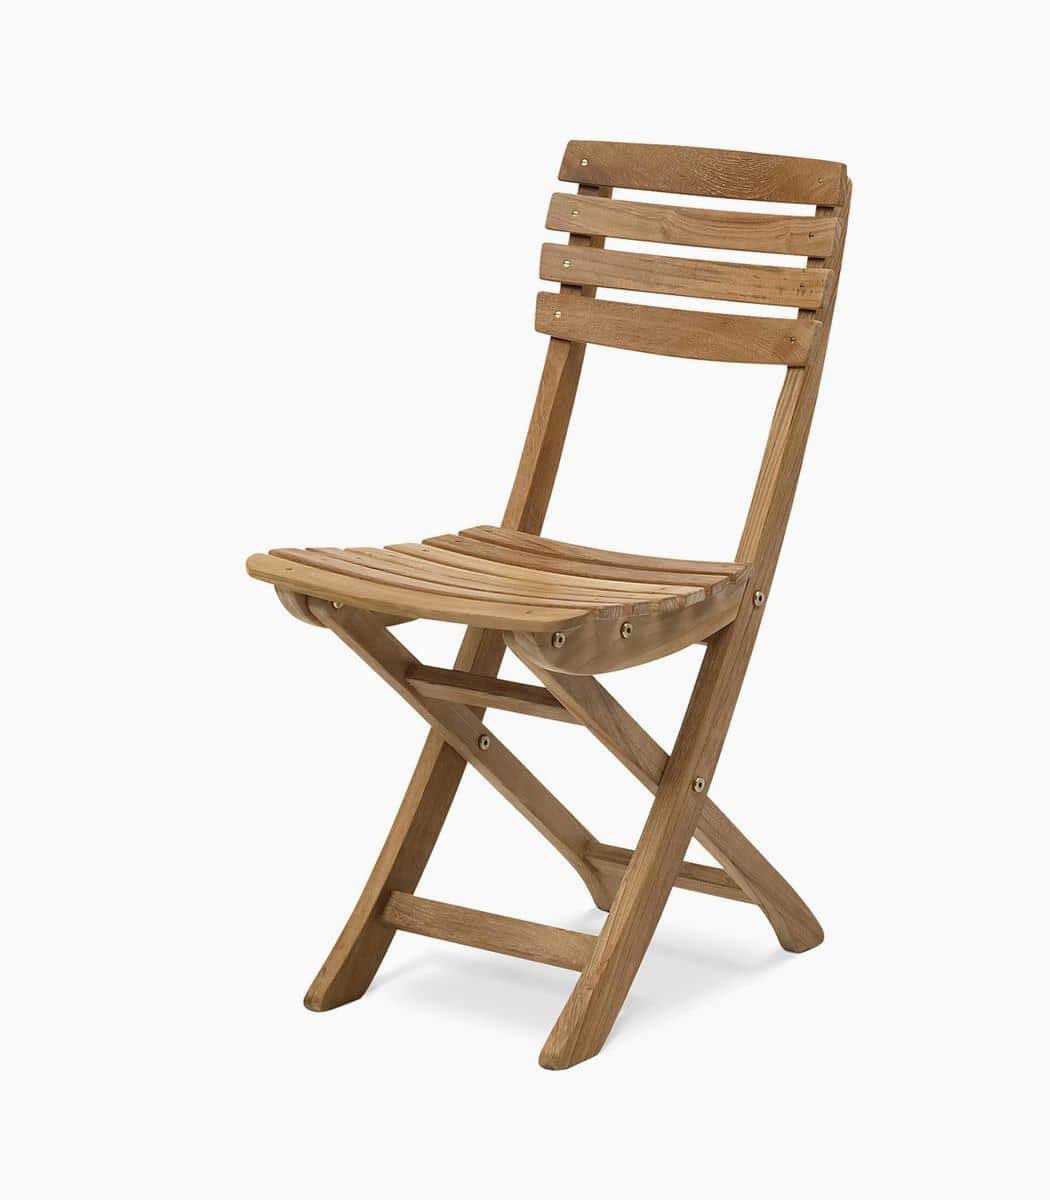 classic wooden chair 1 Home cosmetics